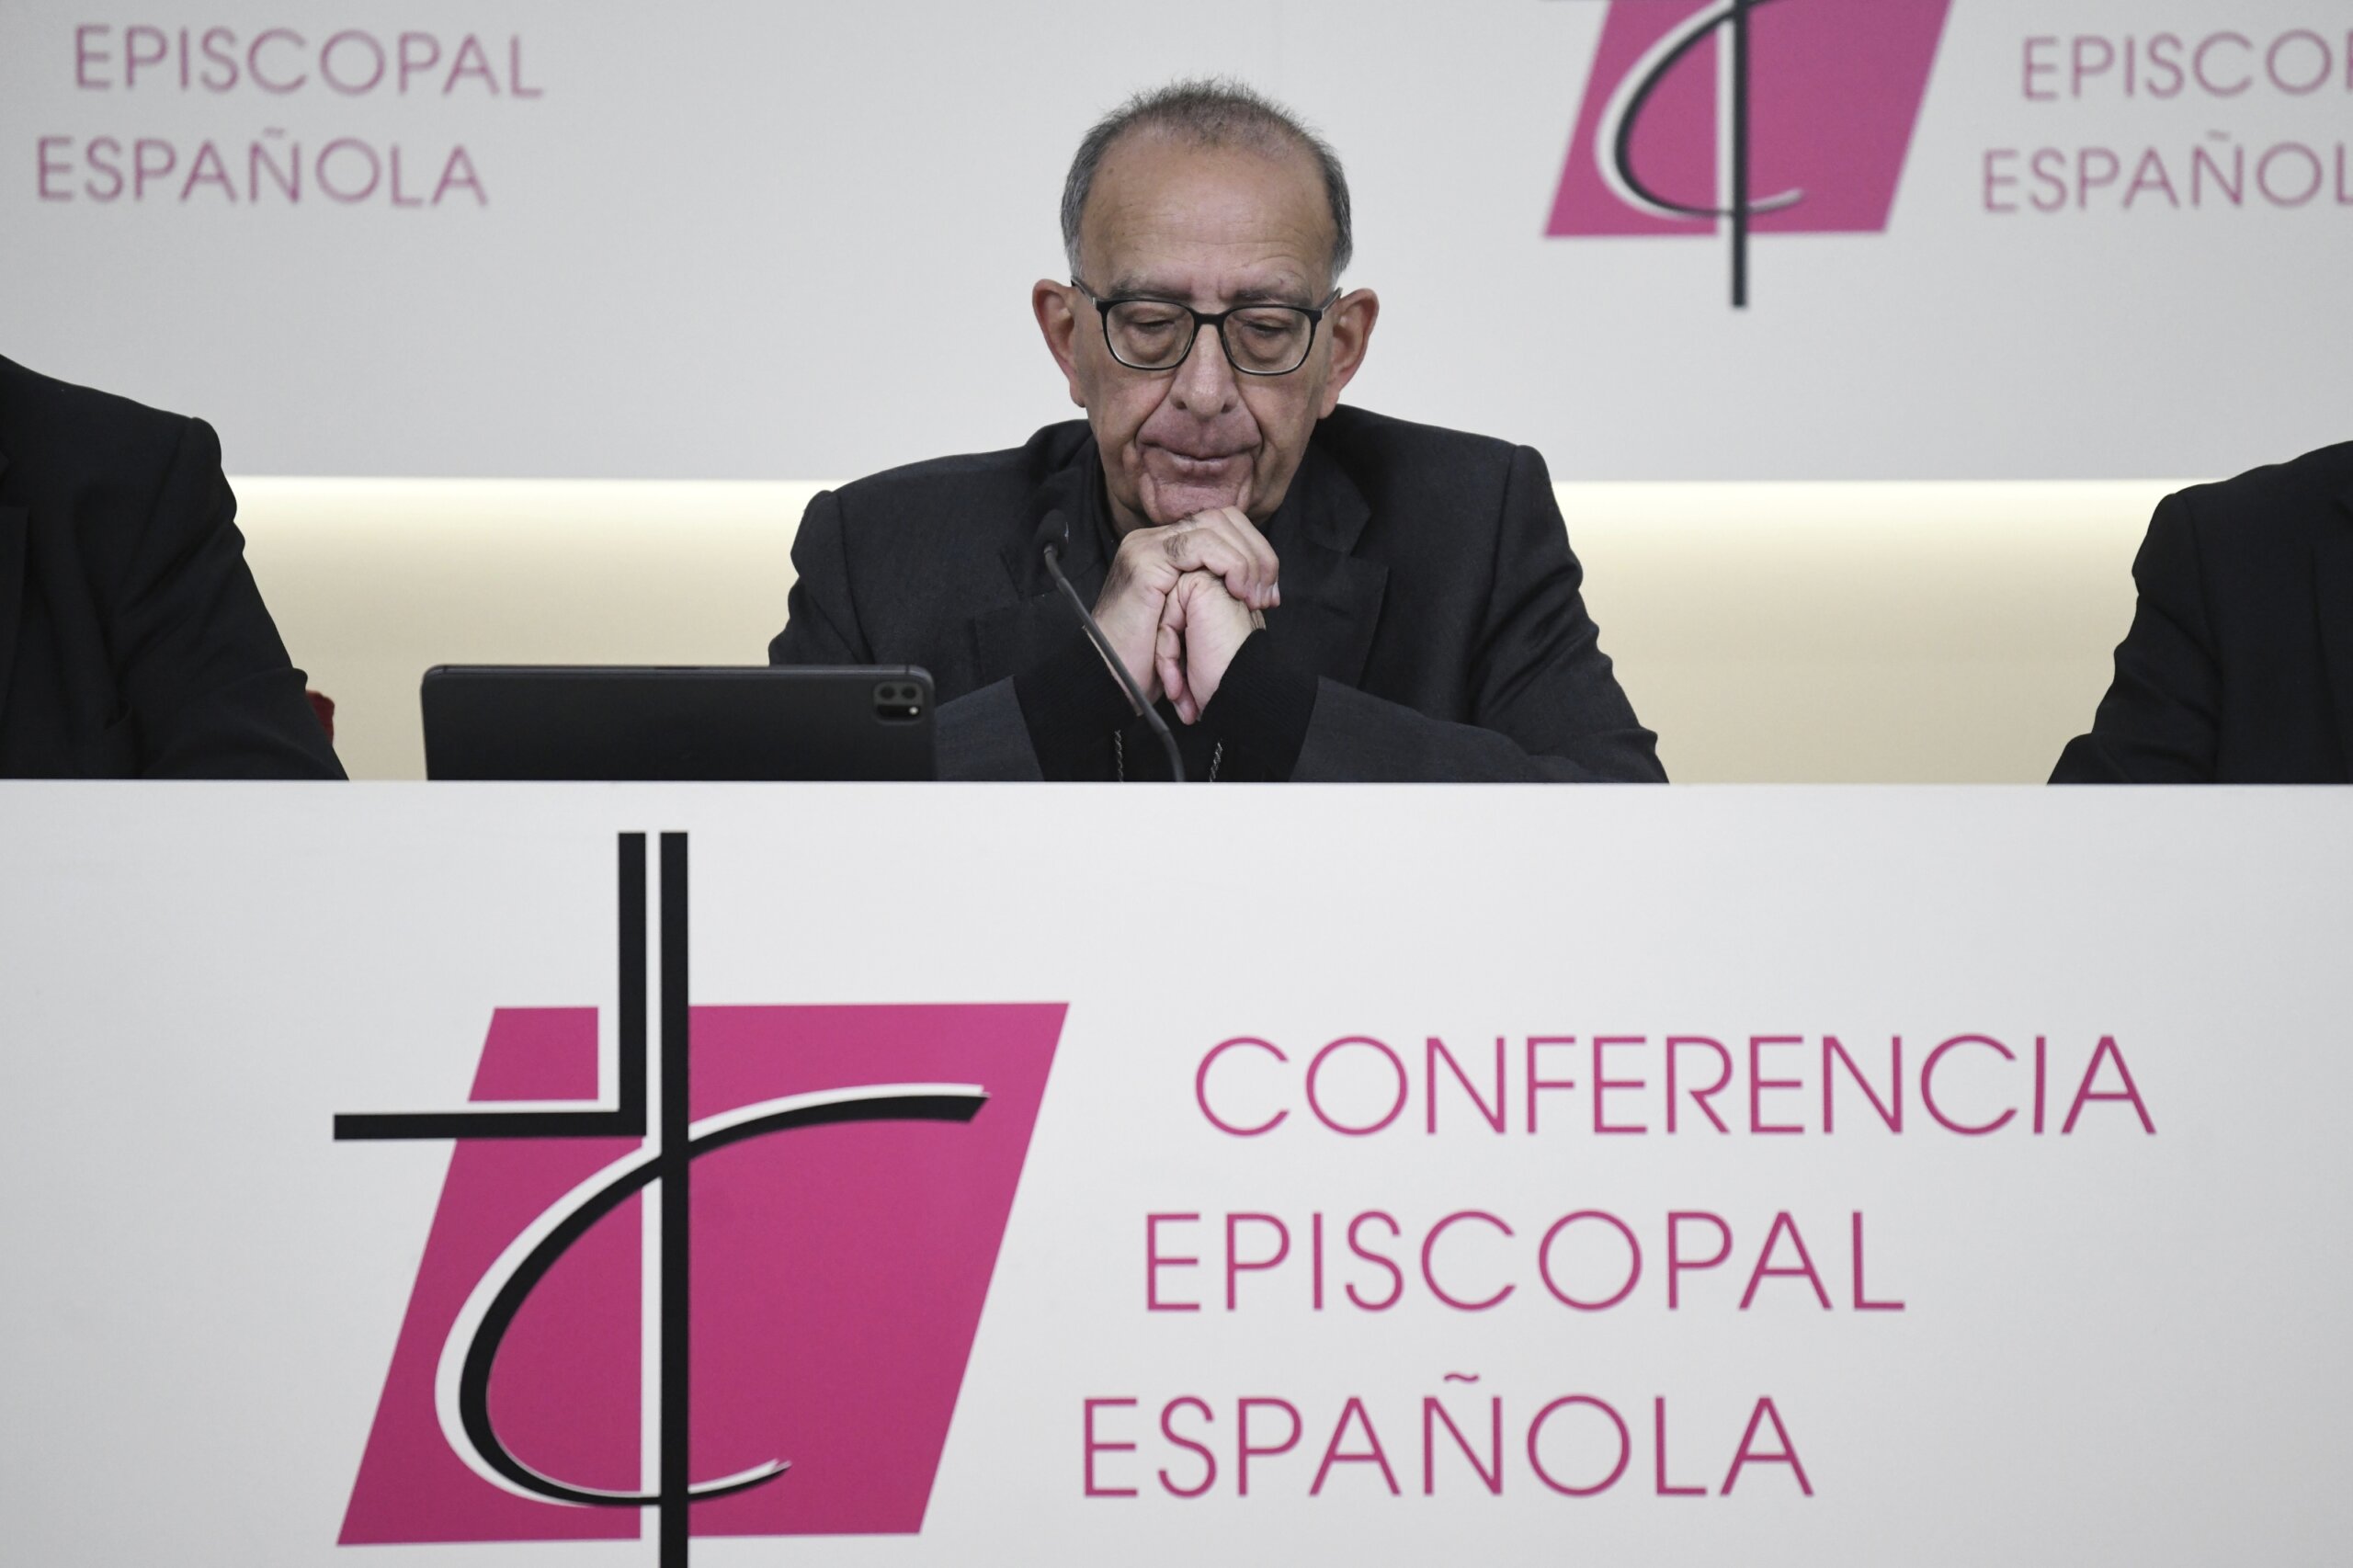 Spain’s bishops apologize for sex abuses but dispute the estimated number of victims in report